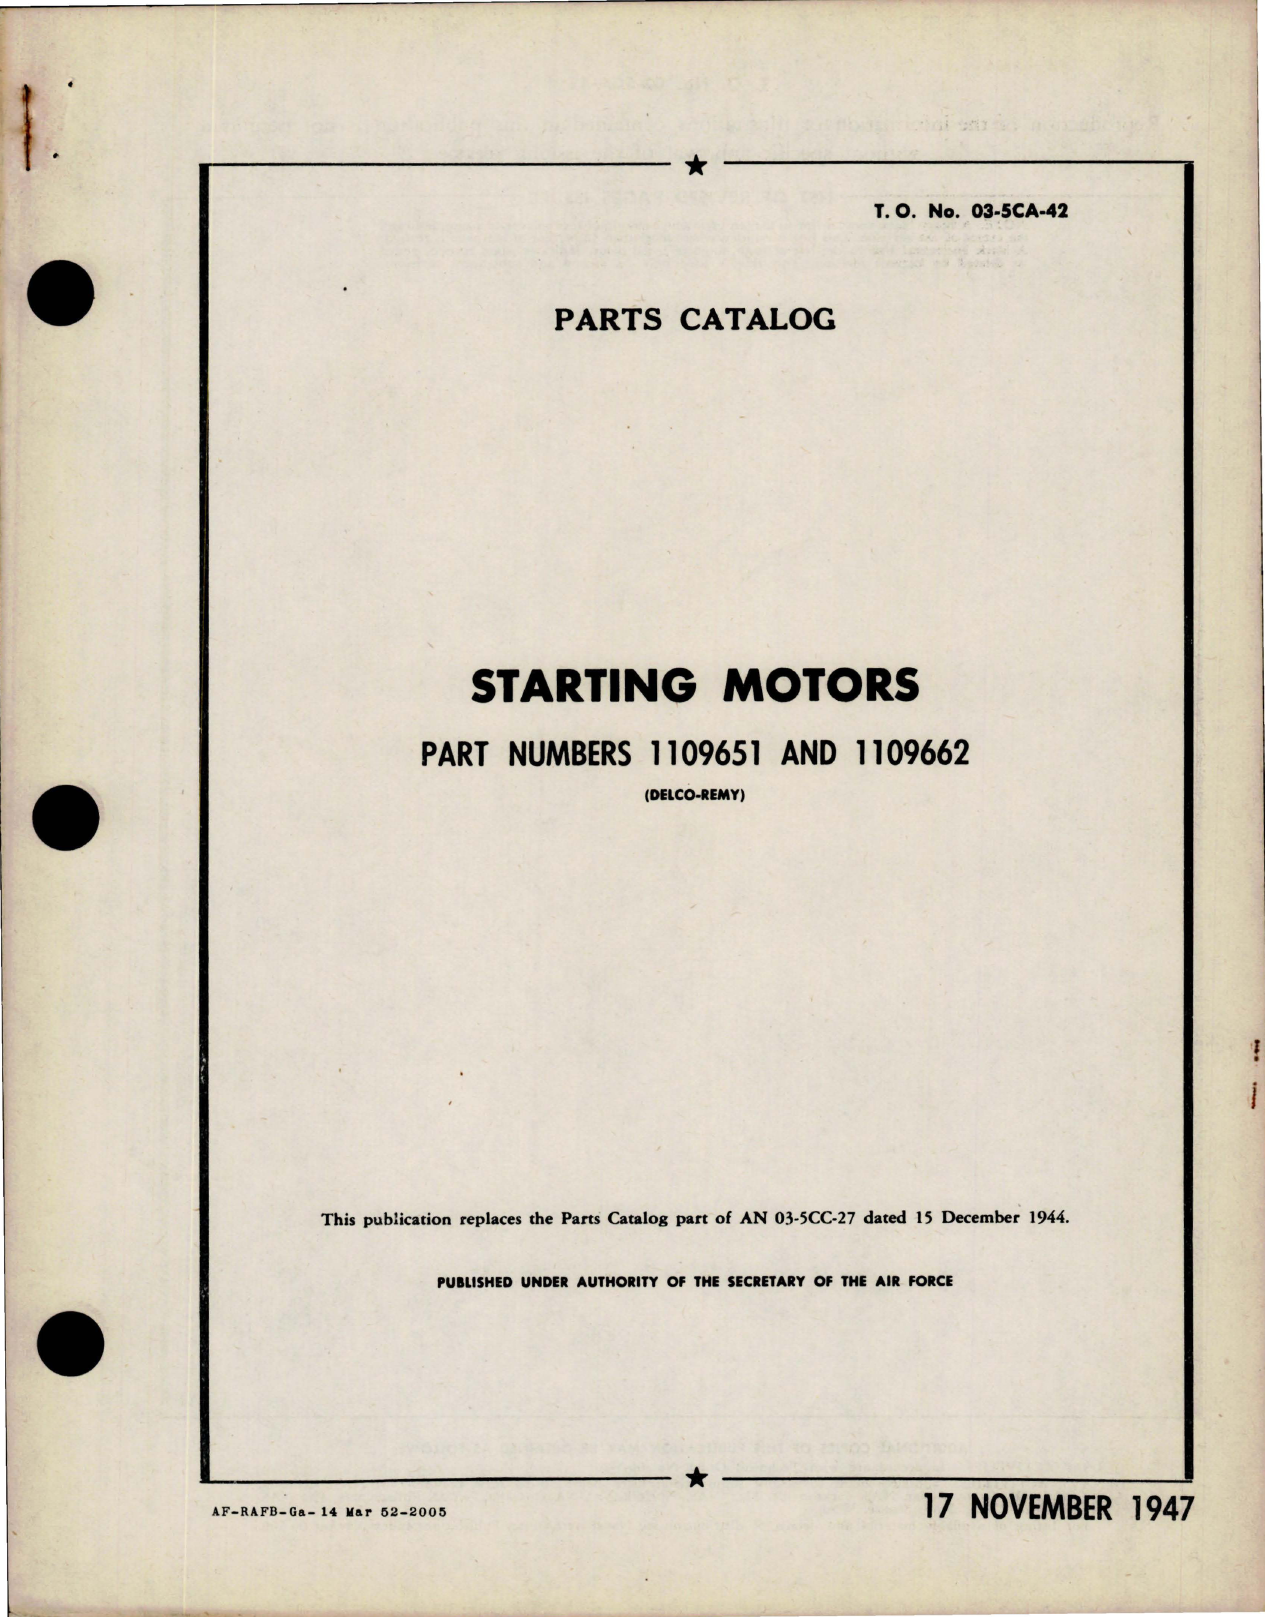 Sample page 1 from AirCorps Library document: Parts Catalog for Starting Motors - Parts 1109651 and 1109662 